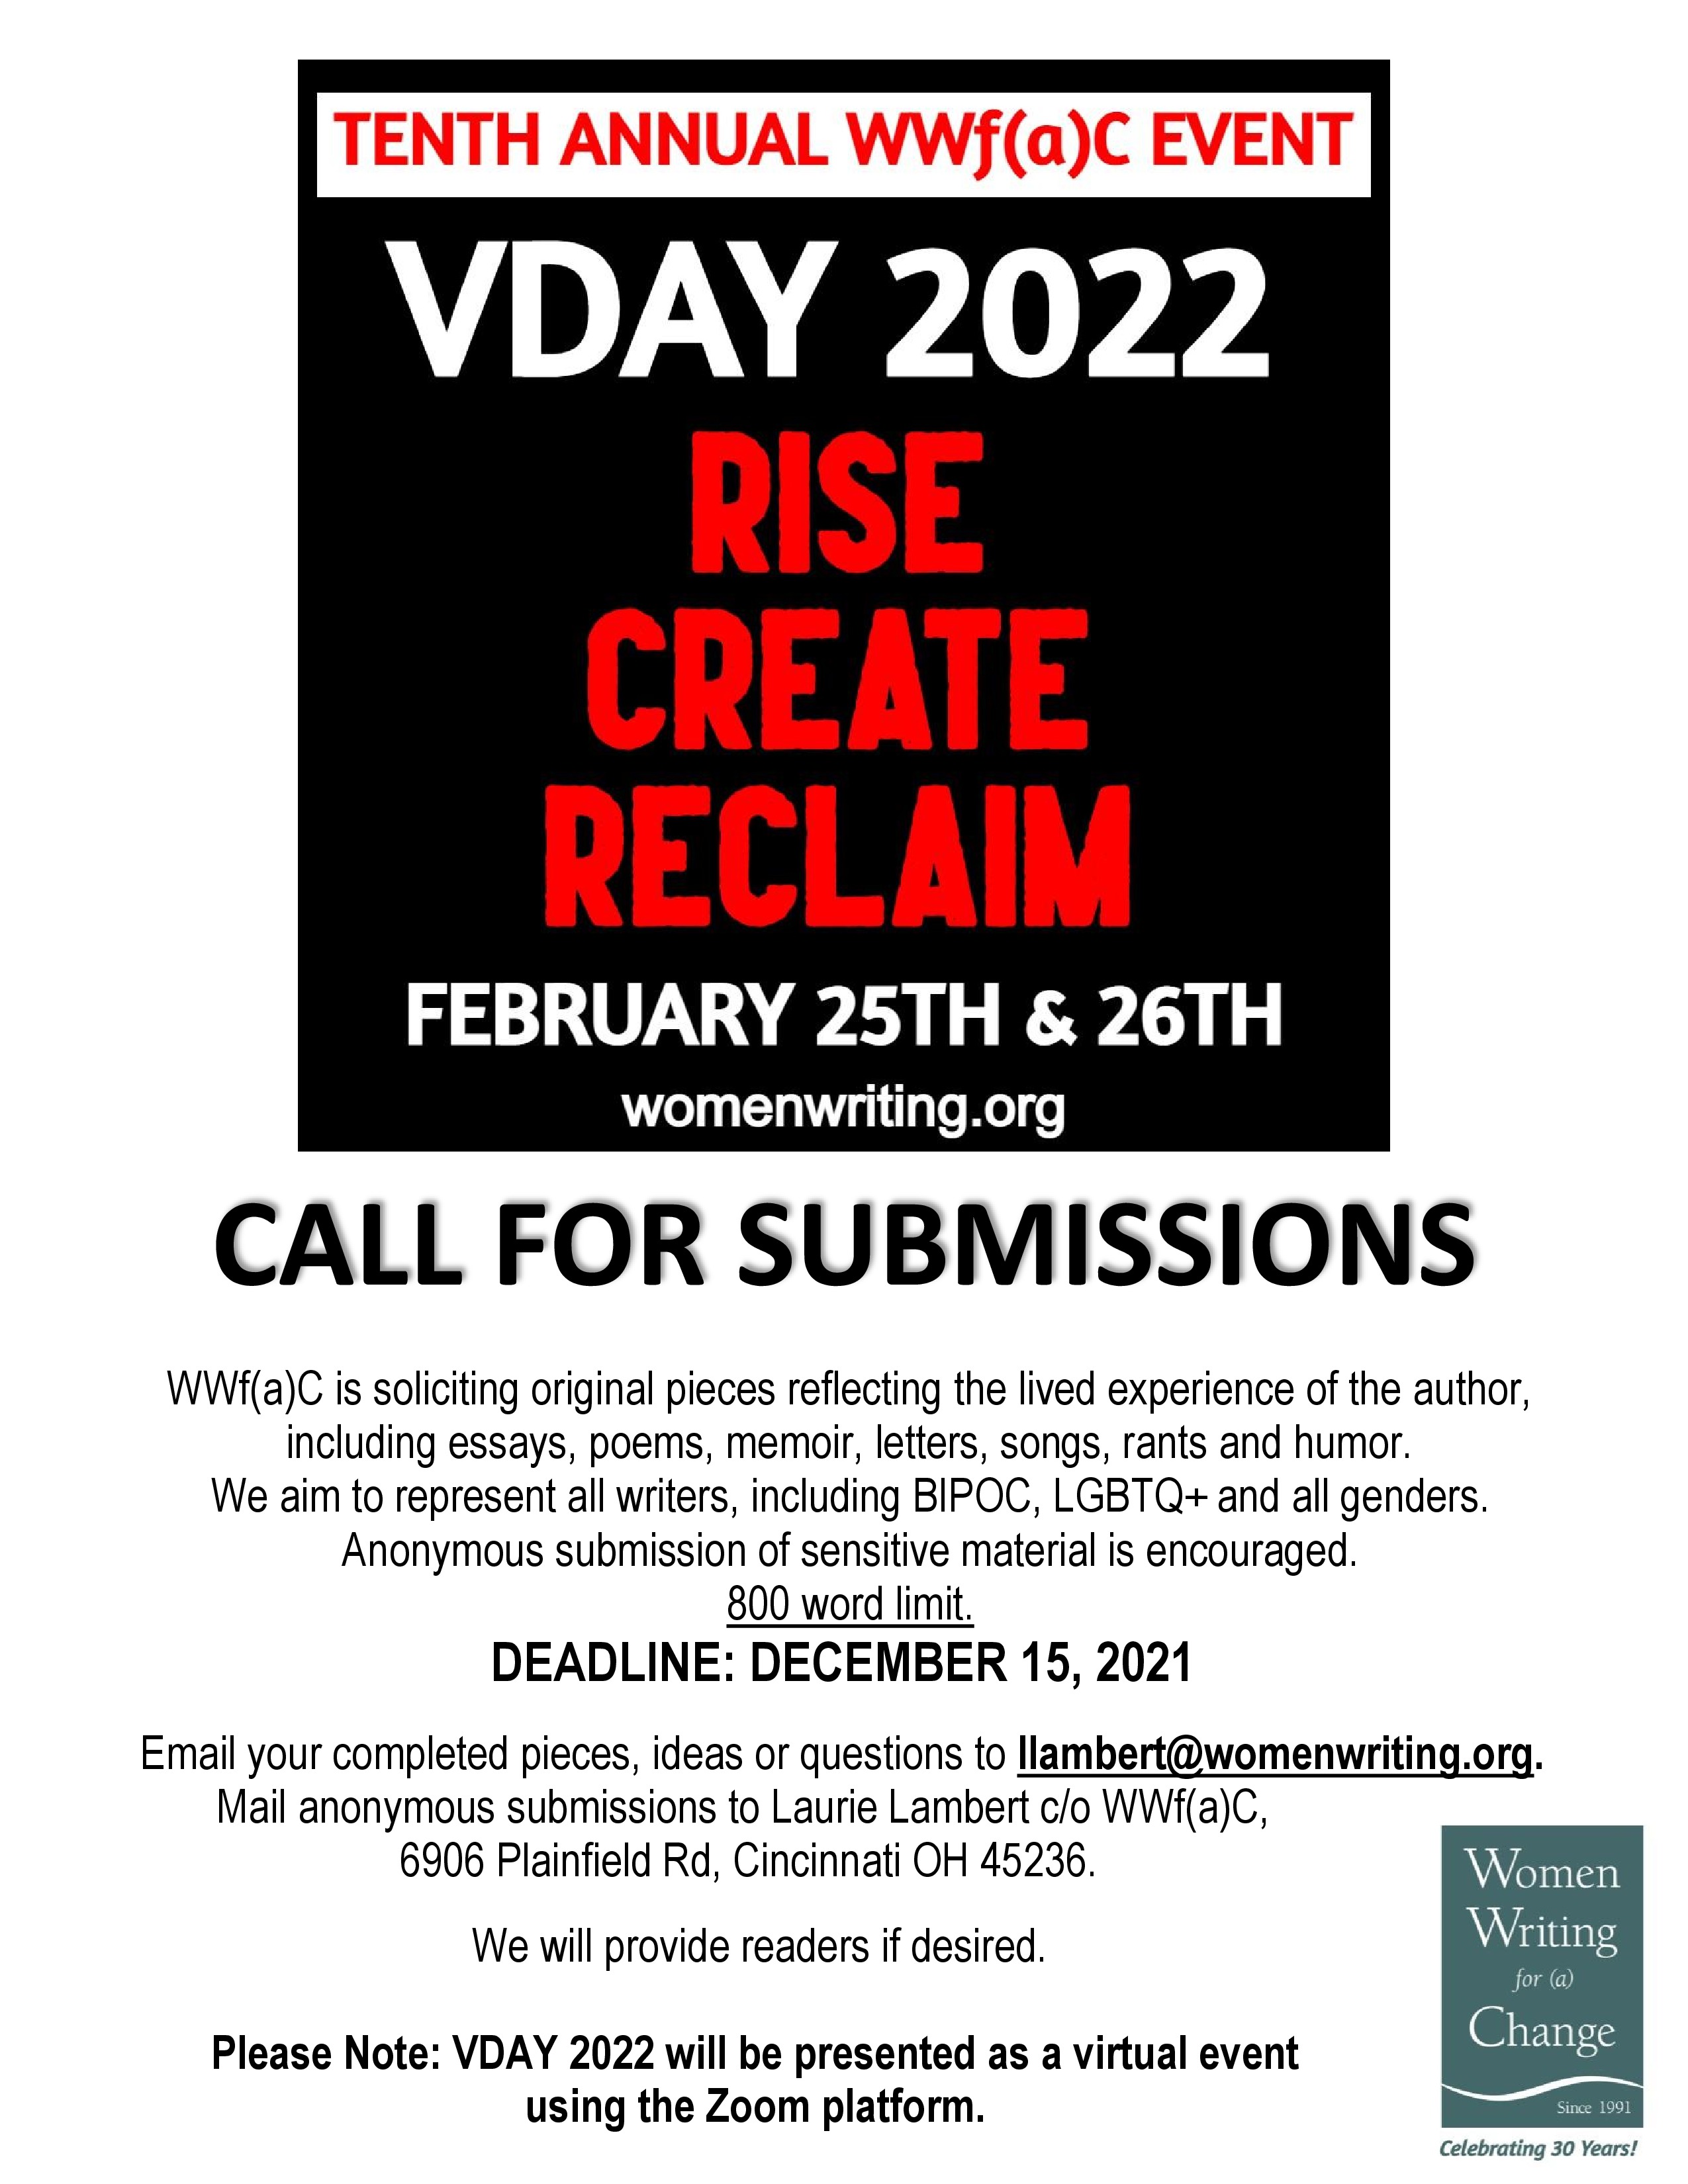 VDAY 2022 Call for Submission Flyer-Event Now Virtual